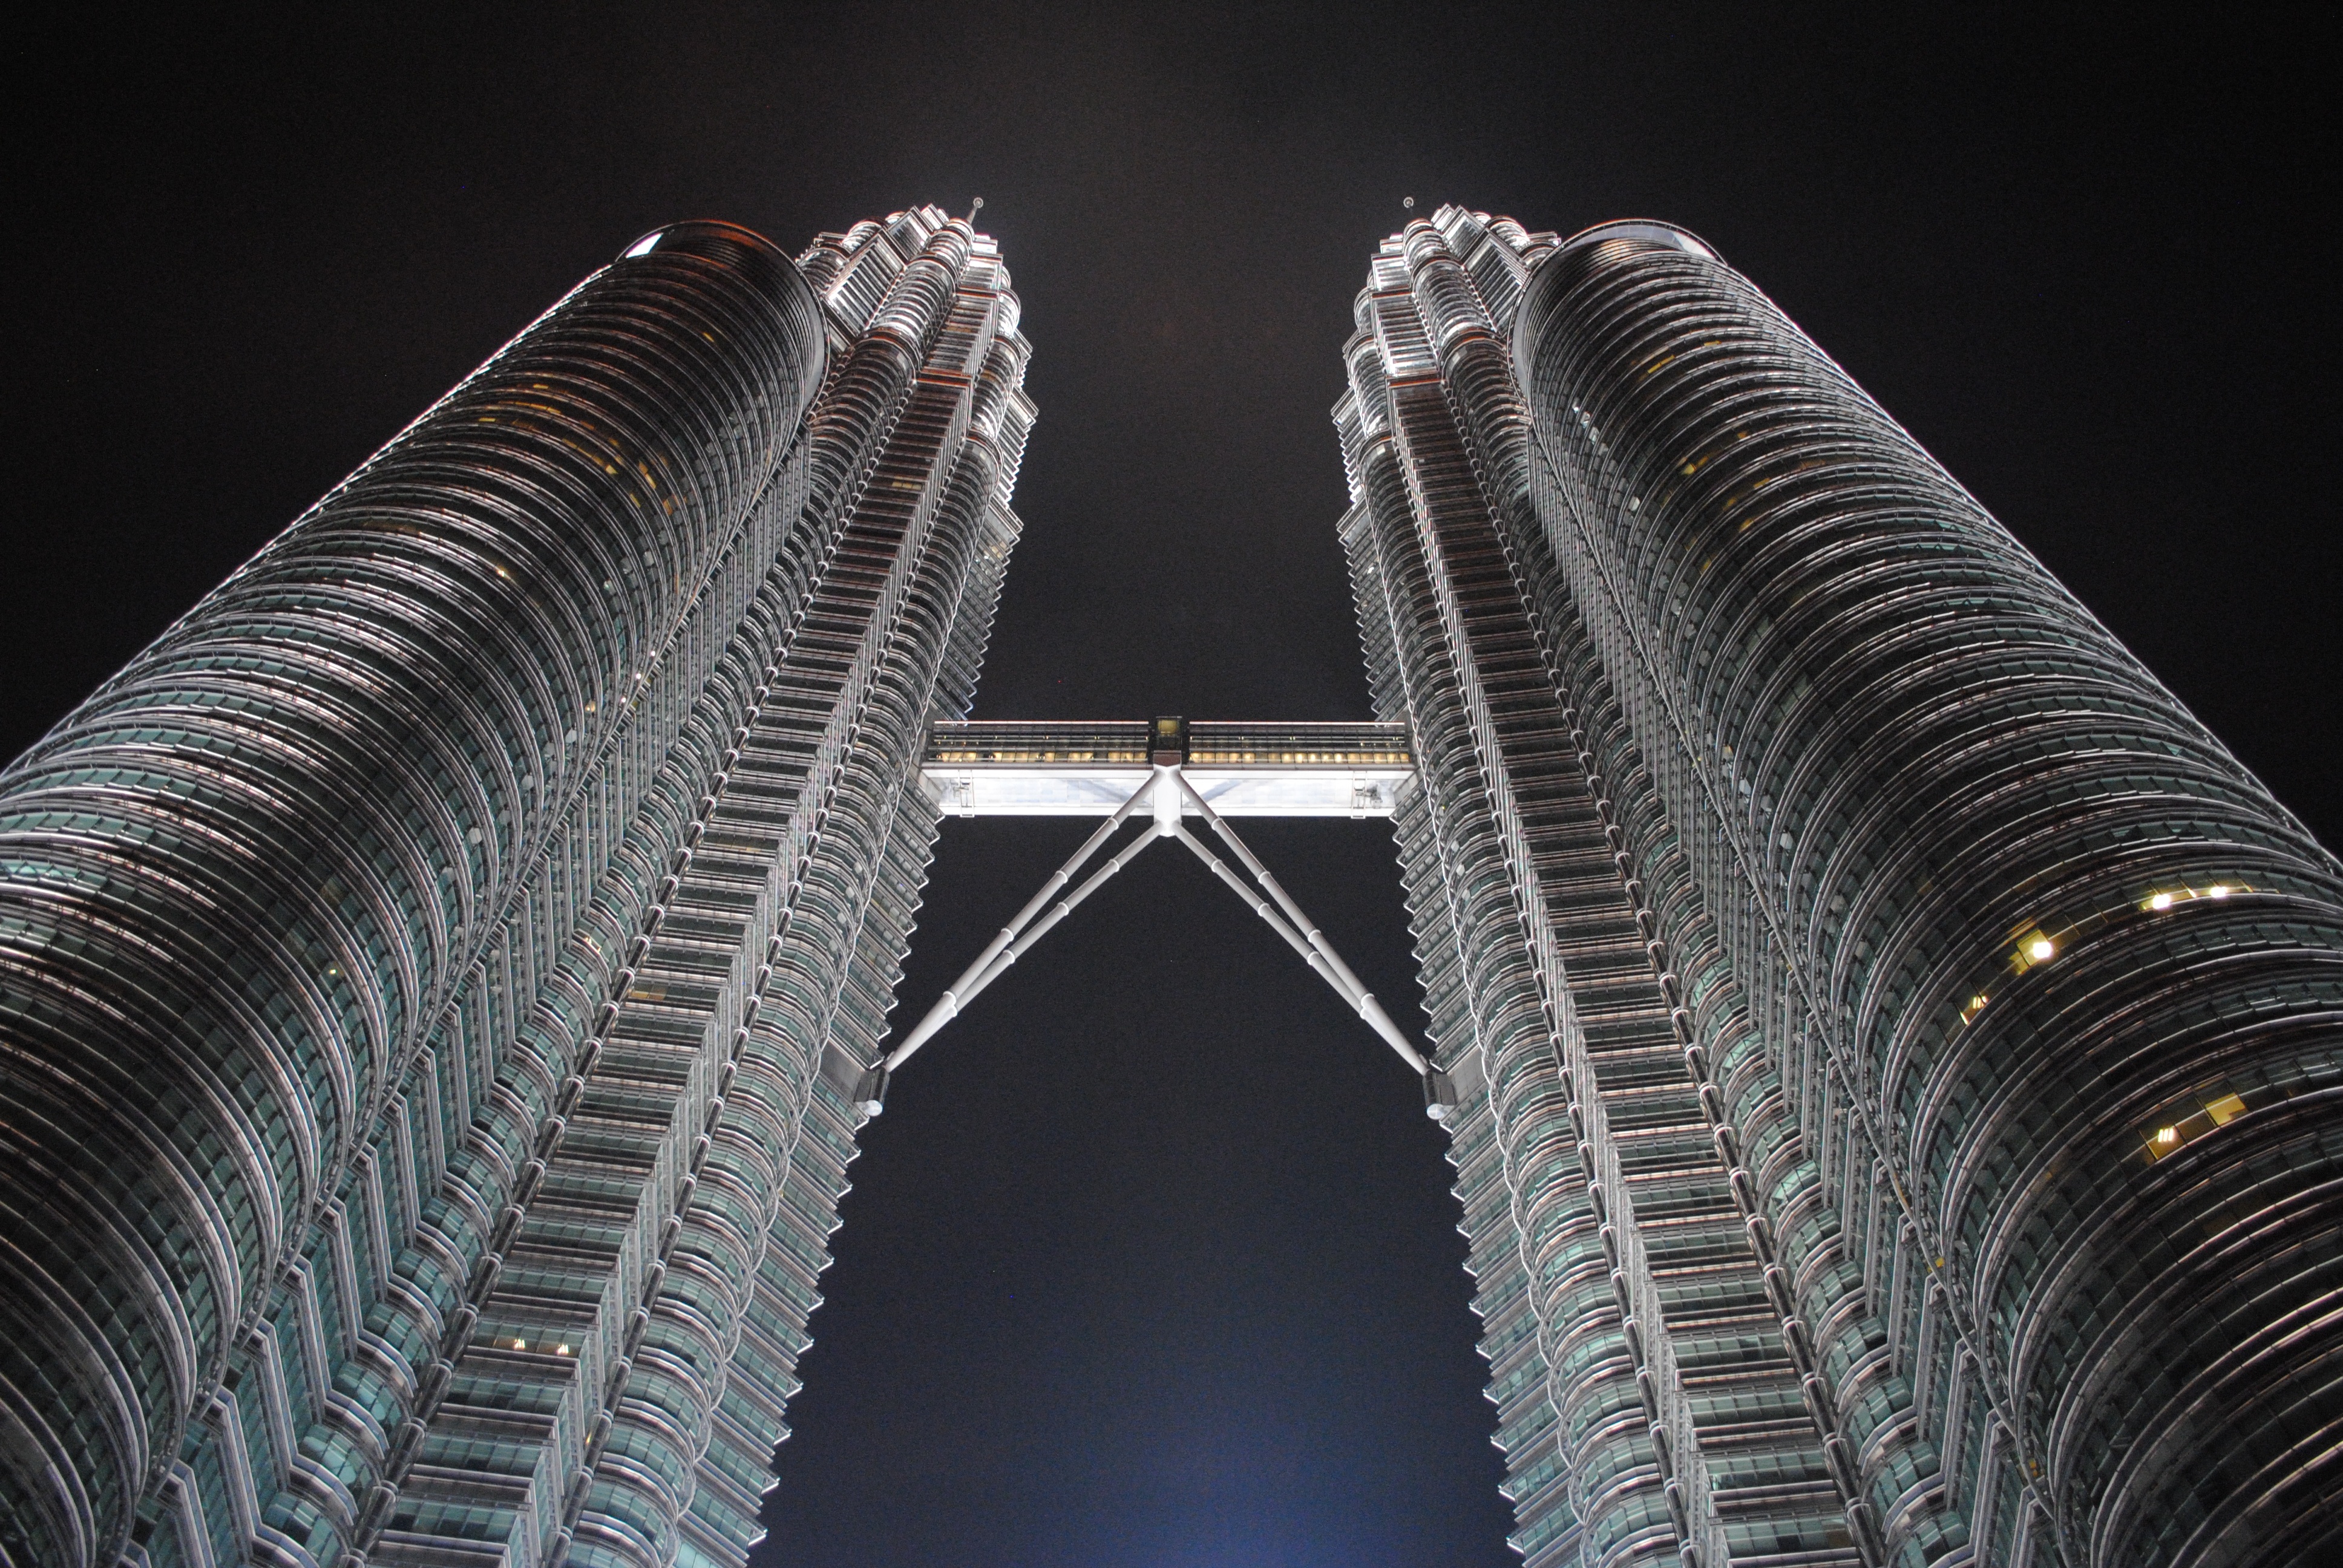 Petronas Towers, also known as the Petronas Twin Towers by evastupica